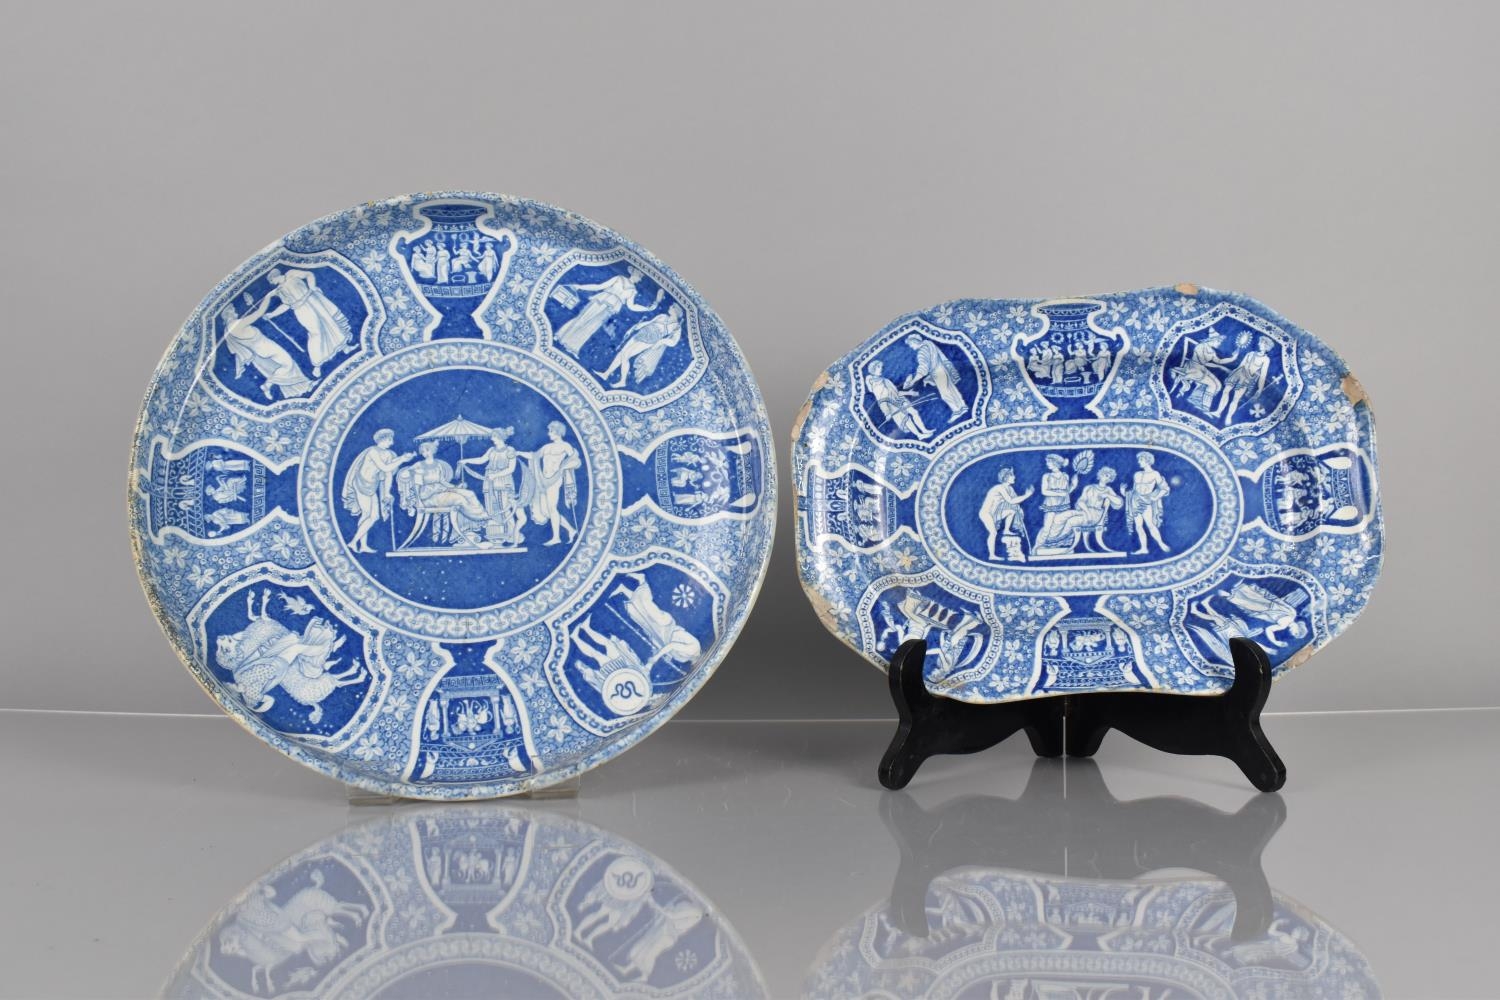 Two Pieces of 19th Century Blue and White Spode, Iphigenia Being Told of Death of Agamemnon - Image 4 of 5